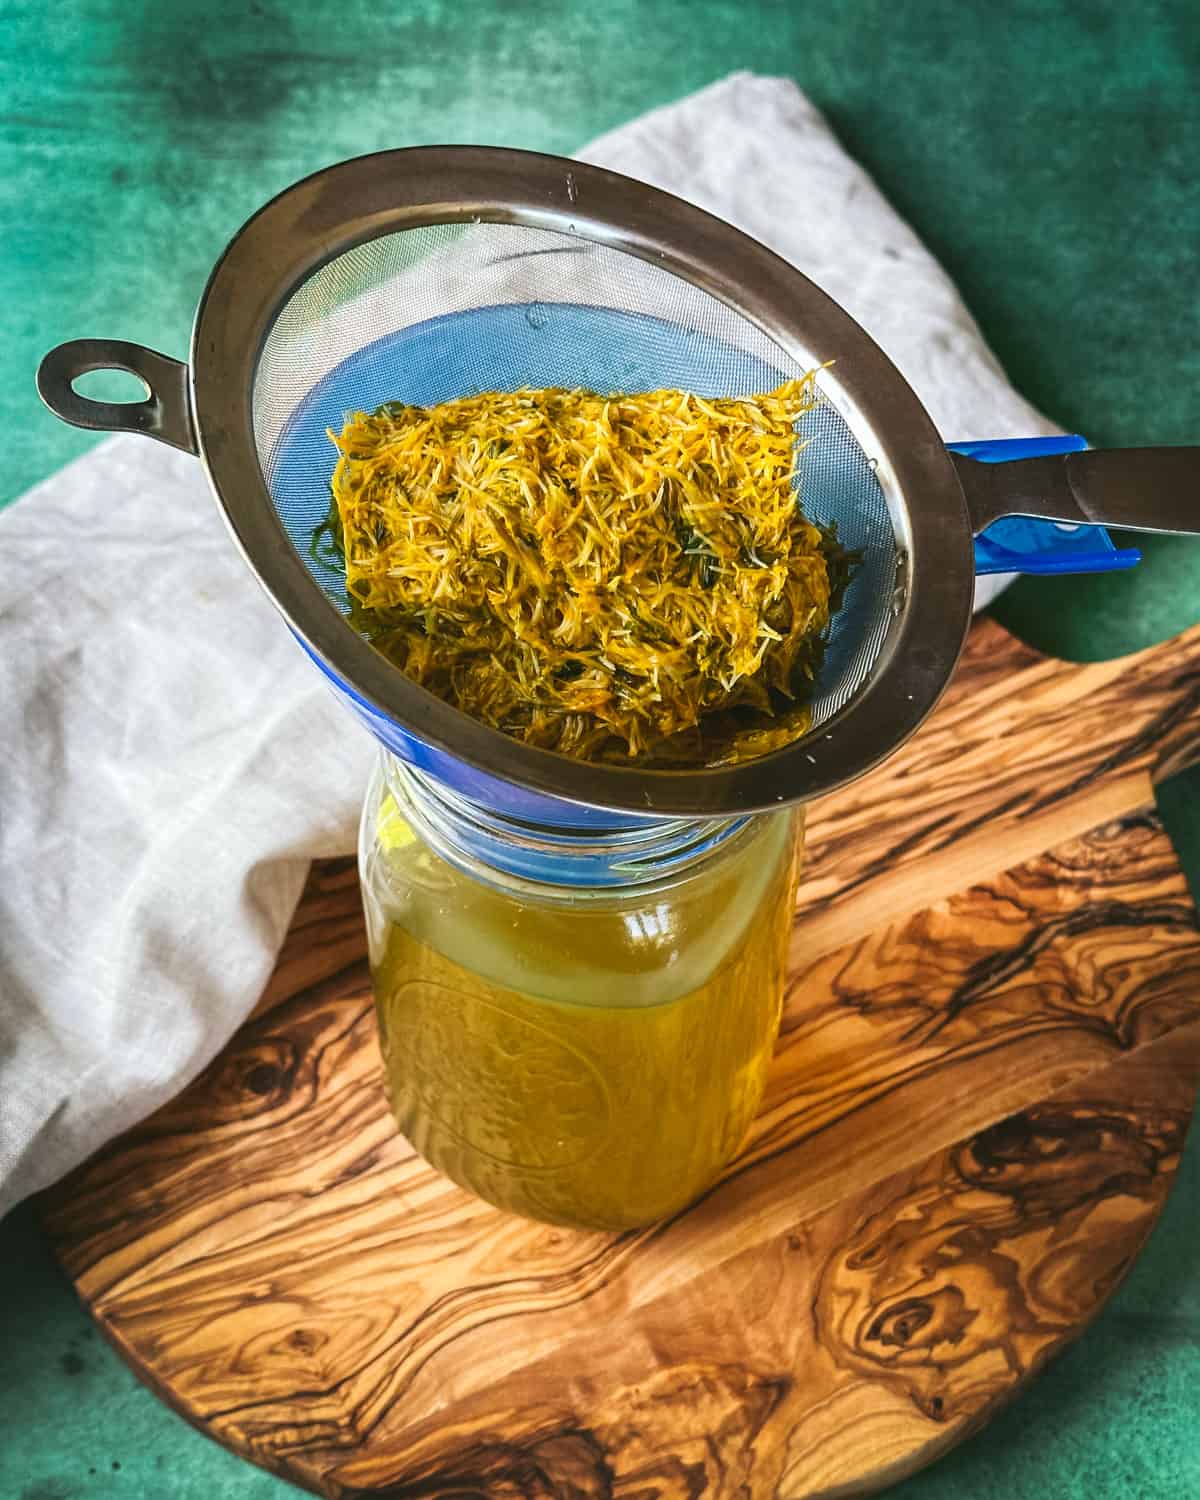 A mesh strainer with dandelion petals over a jar with dandelion tea on a wood cutting board with a natural cloth and green background.